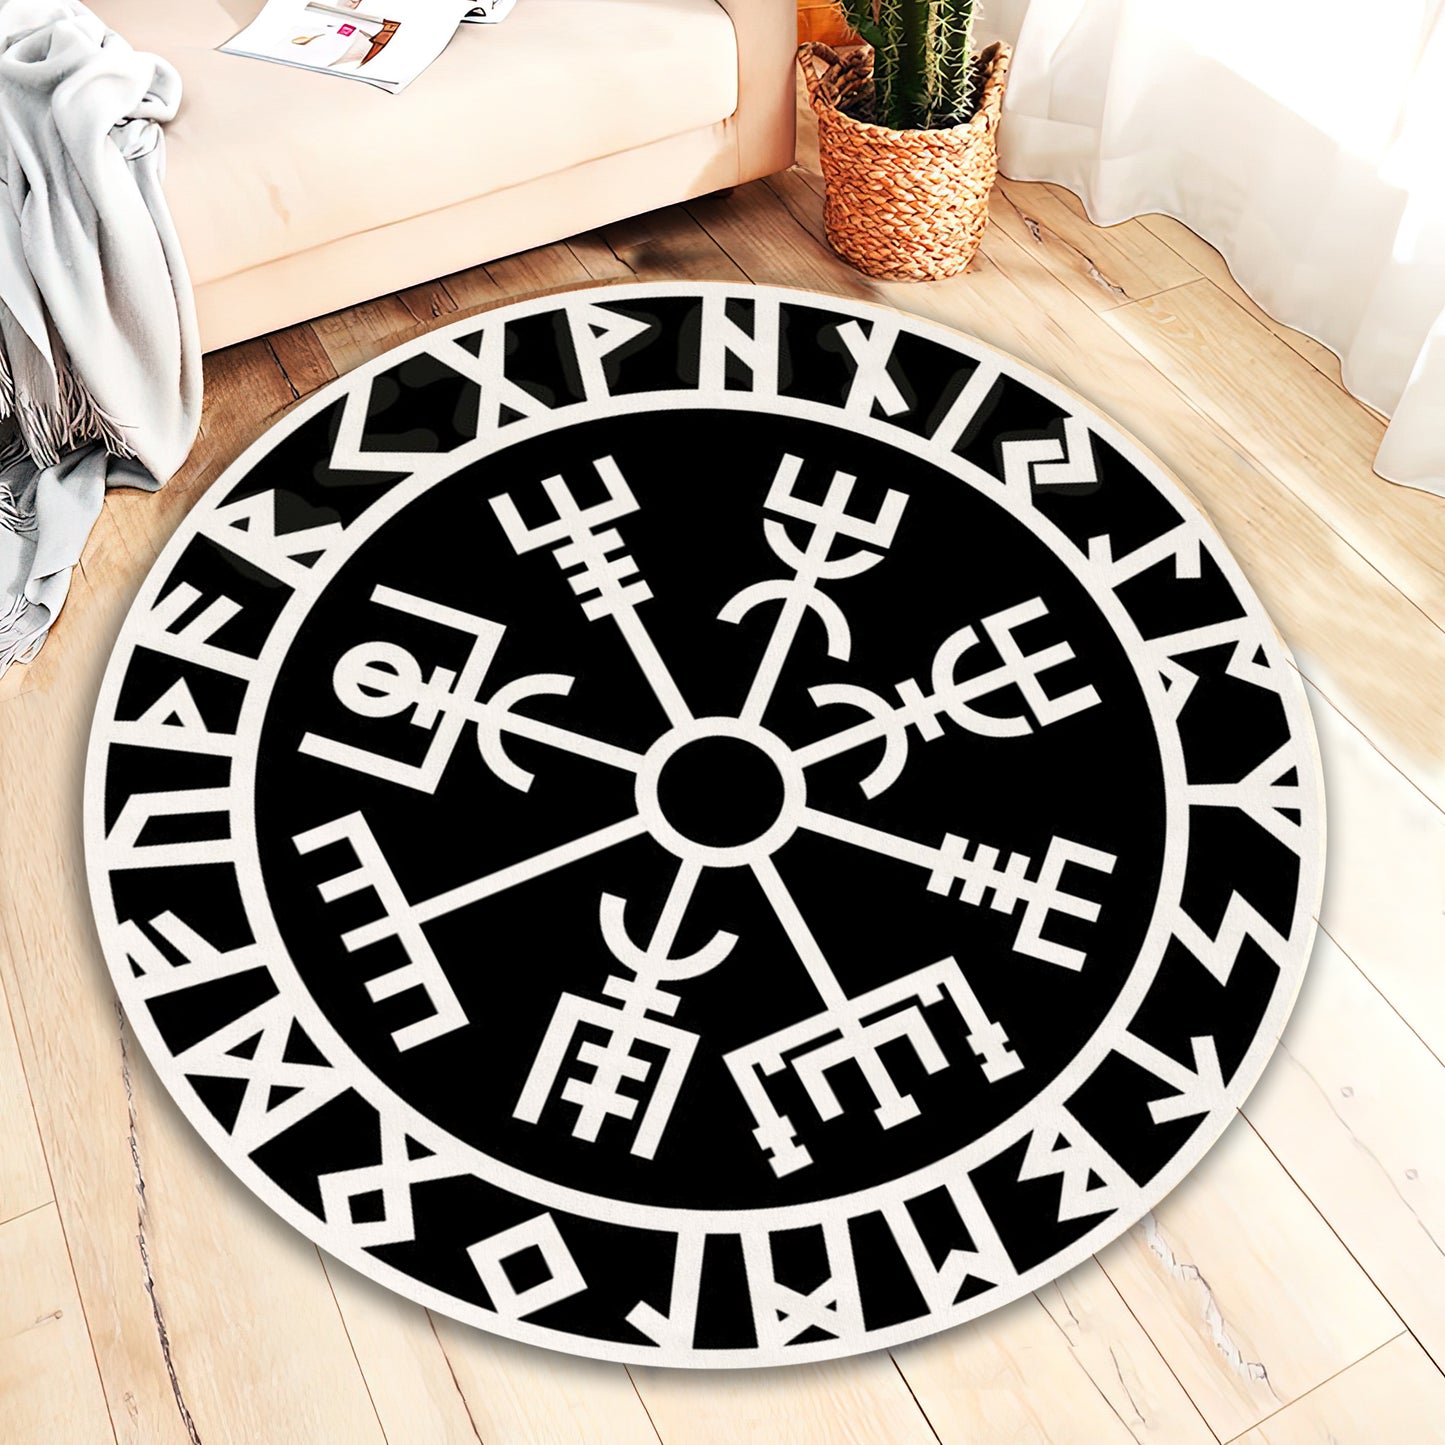 Protection Symbol Rug, Black and White Compass Mat, Viking Compass Carpet, Entryway Decor